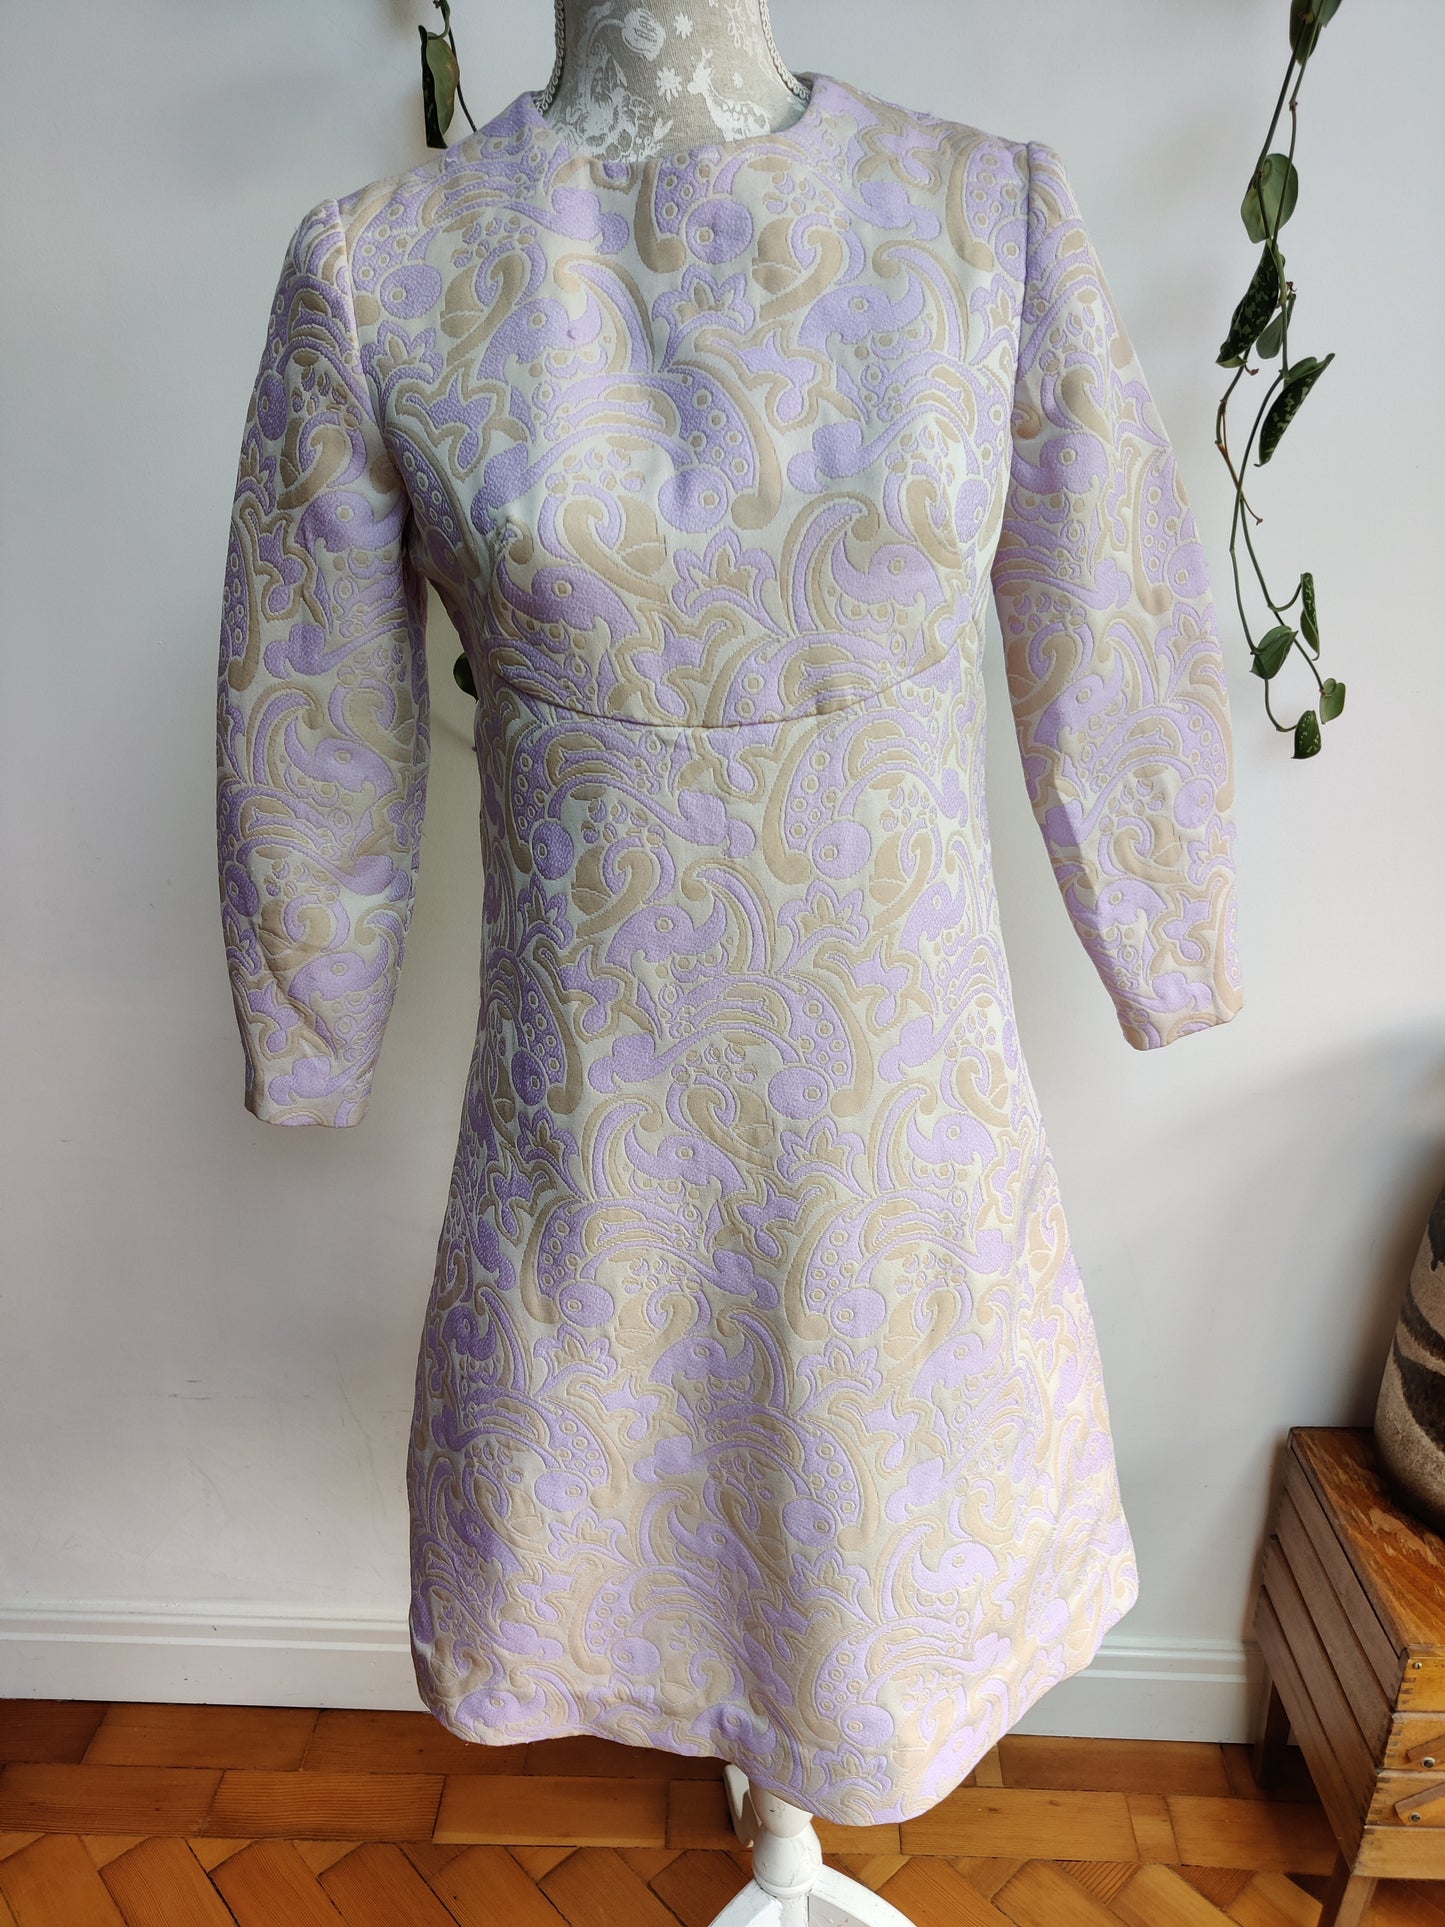 Incredible genuine vintage 60s mod dress in lilac. Size 10